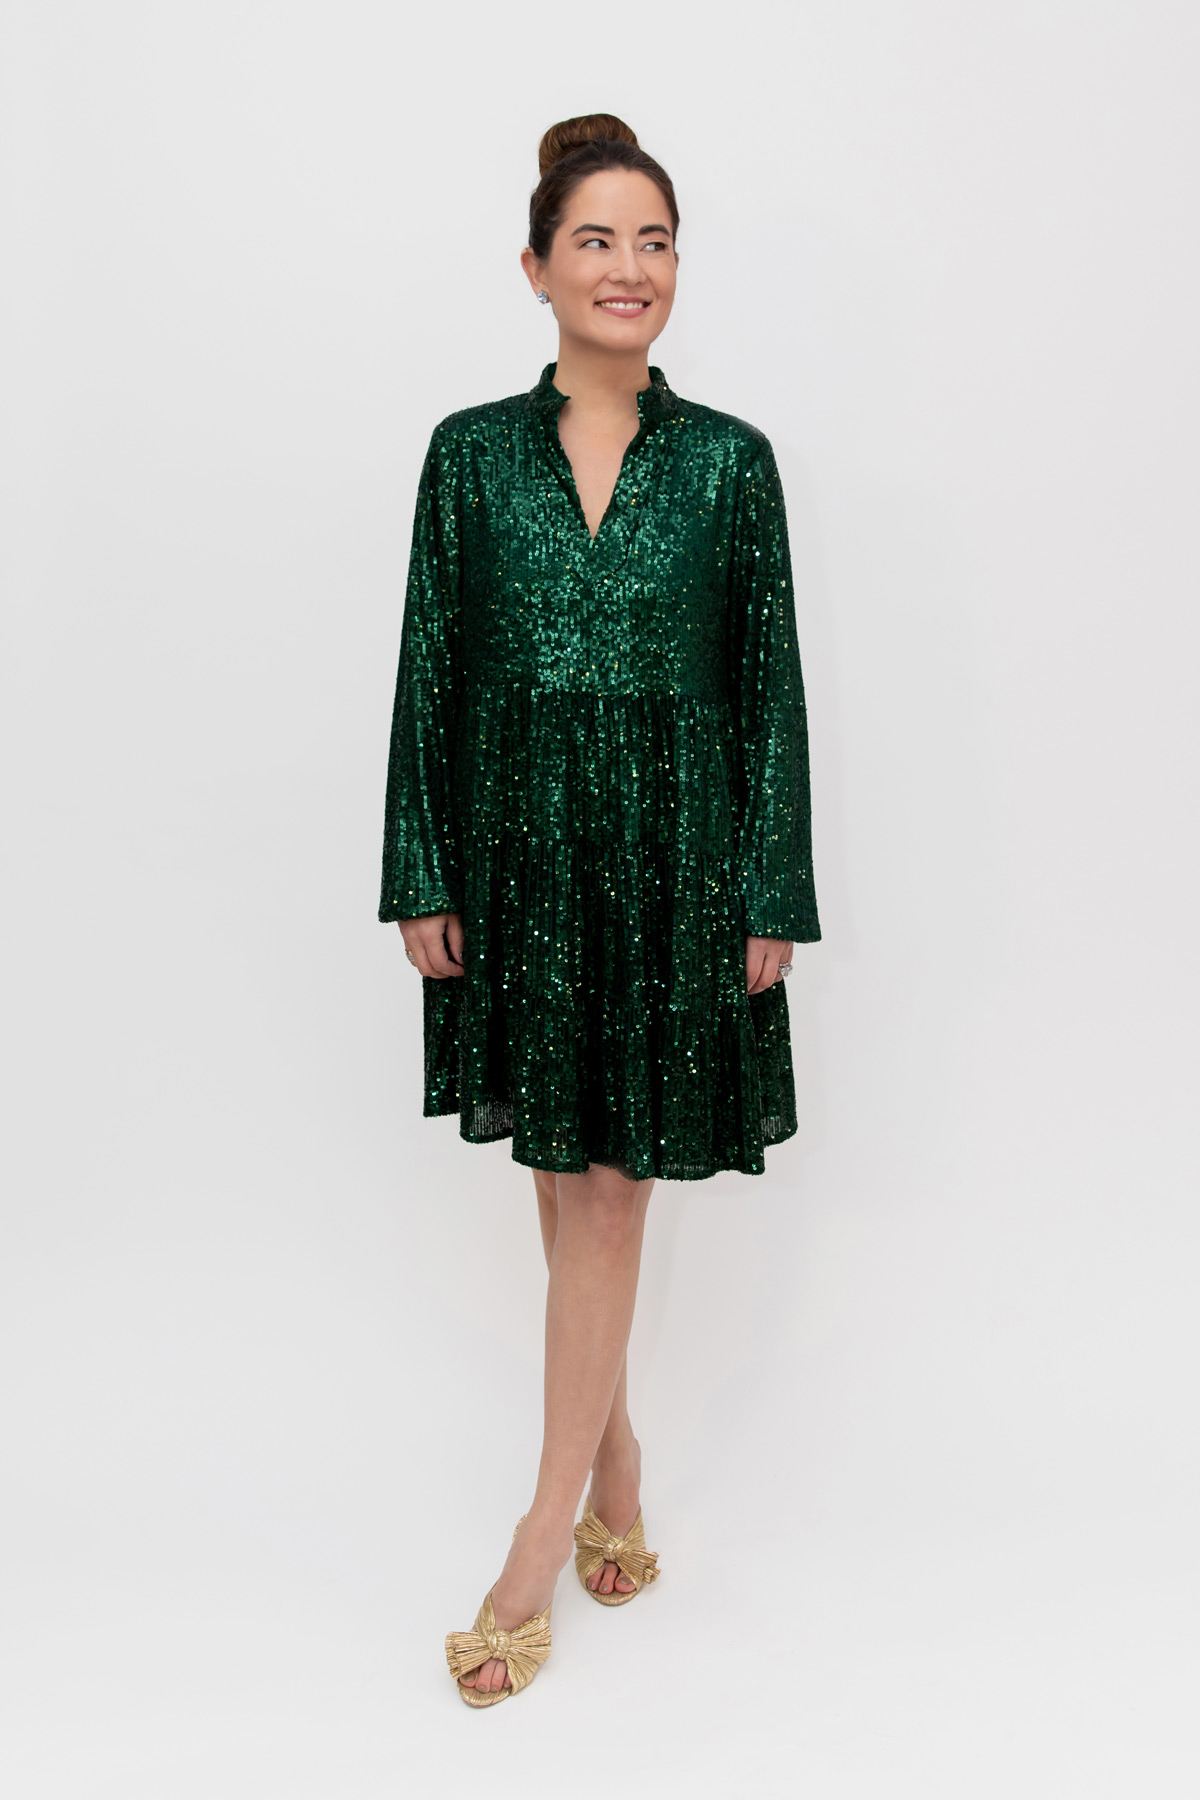 Sail to Sable Holiday Collection Emerald Sequin Dress